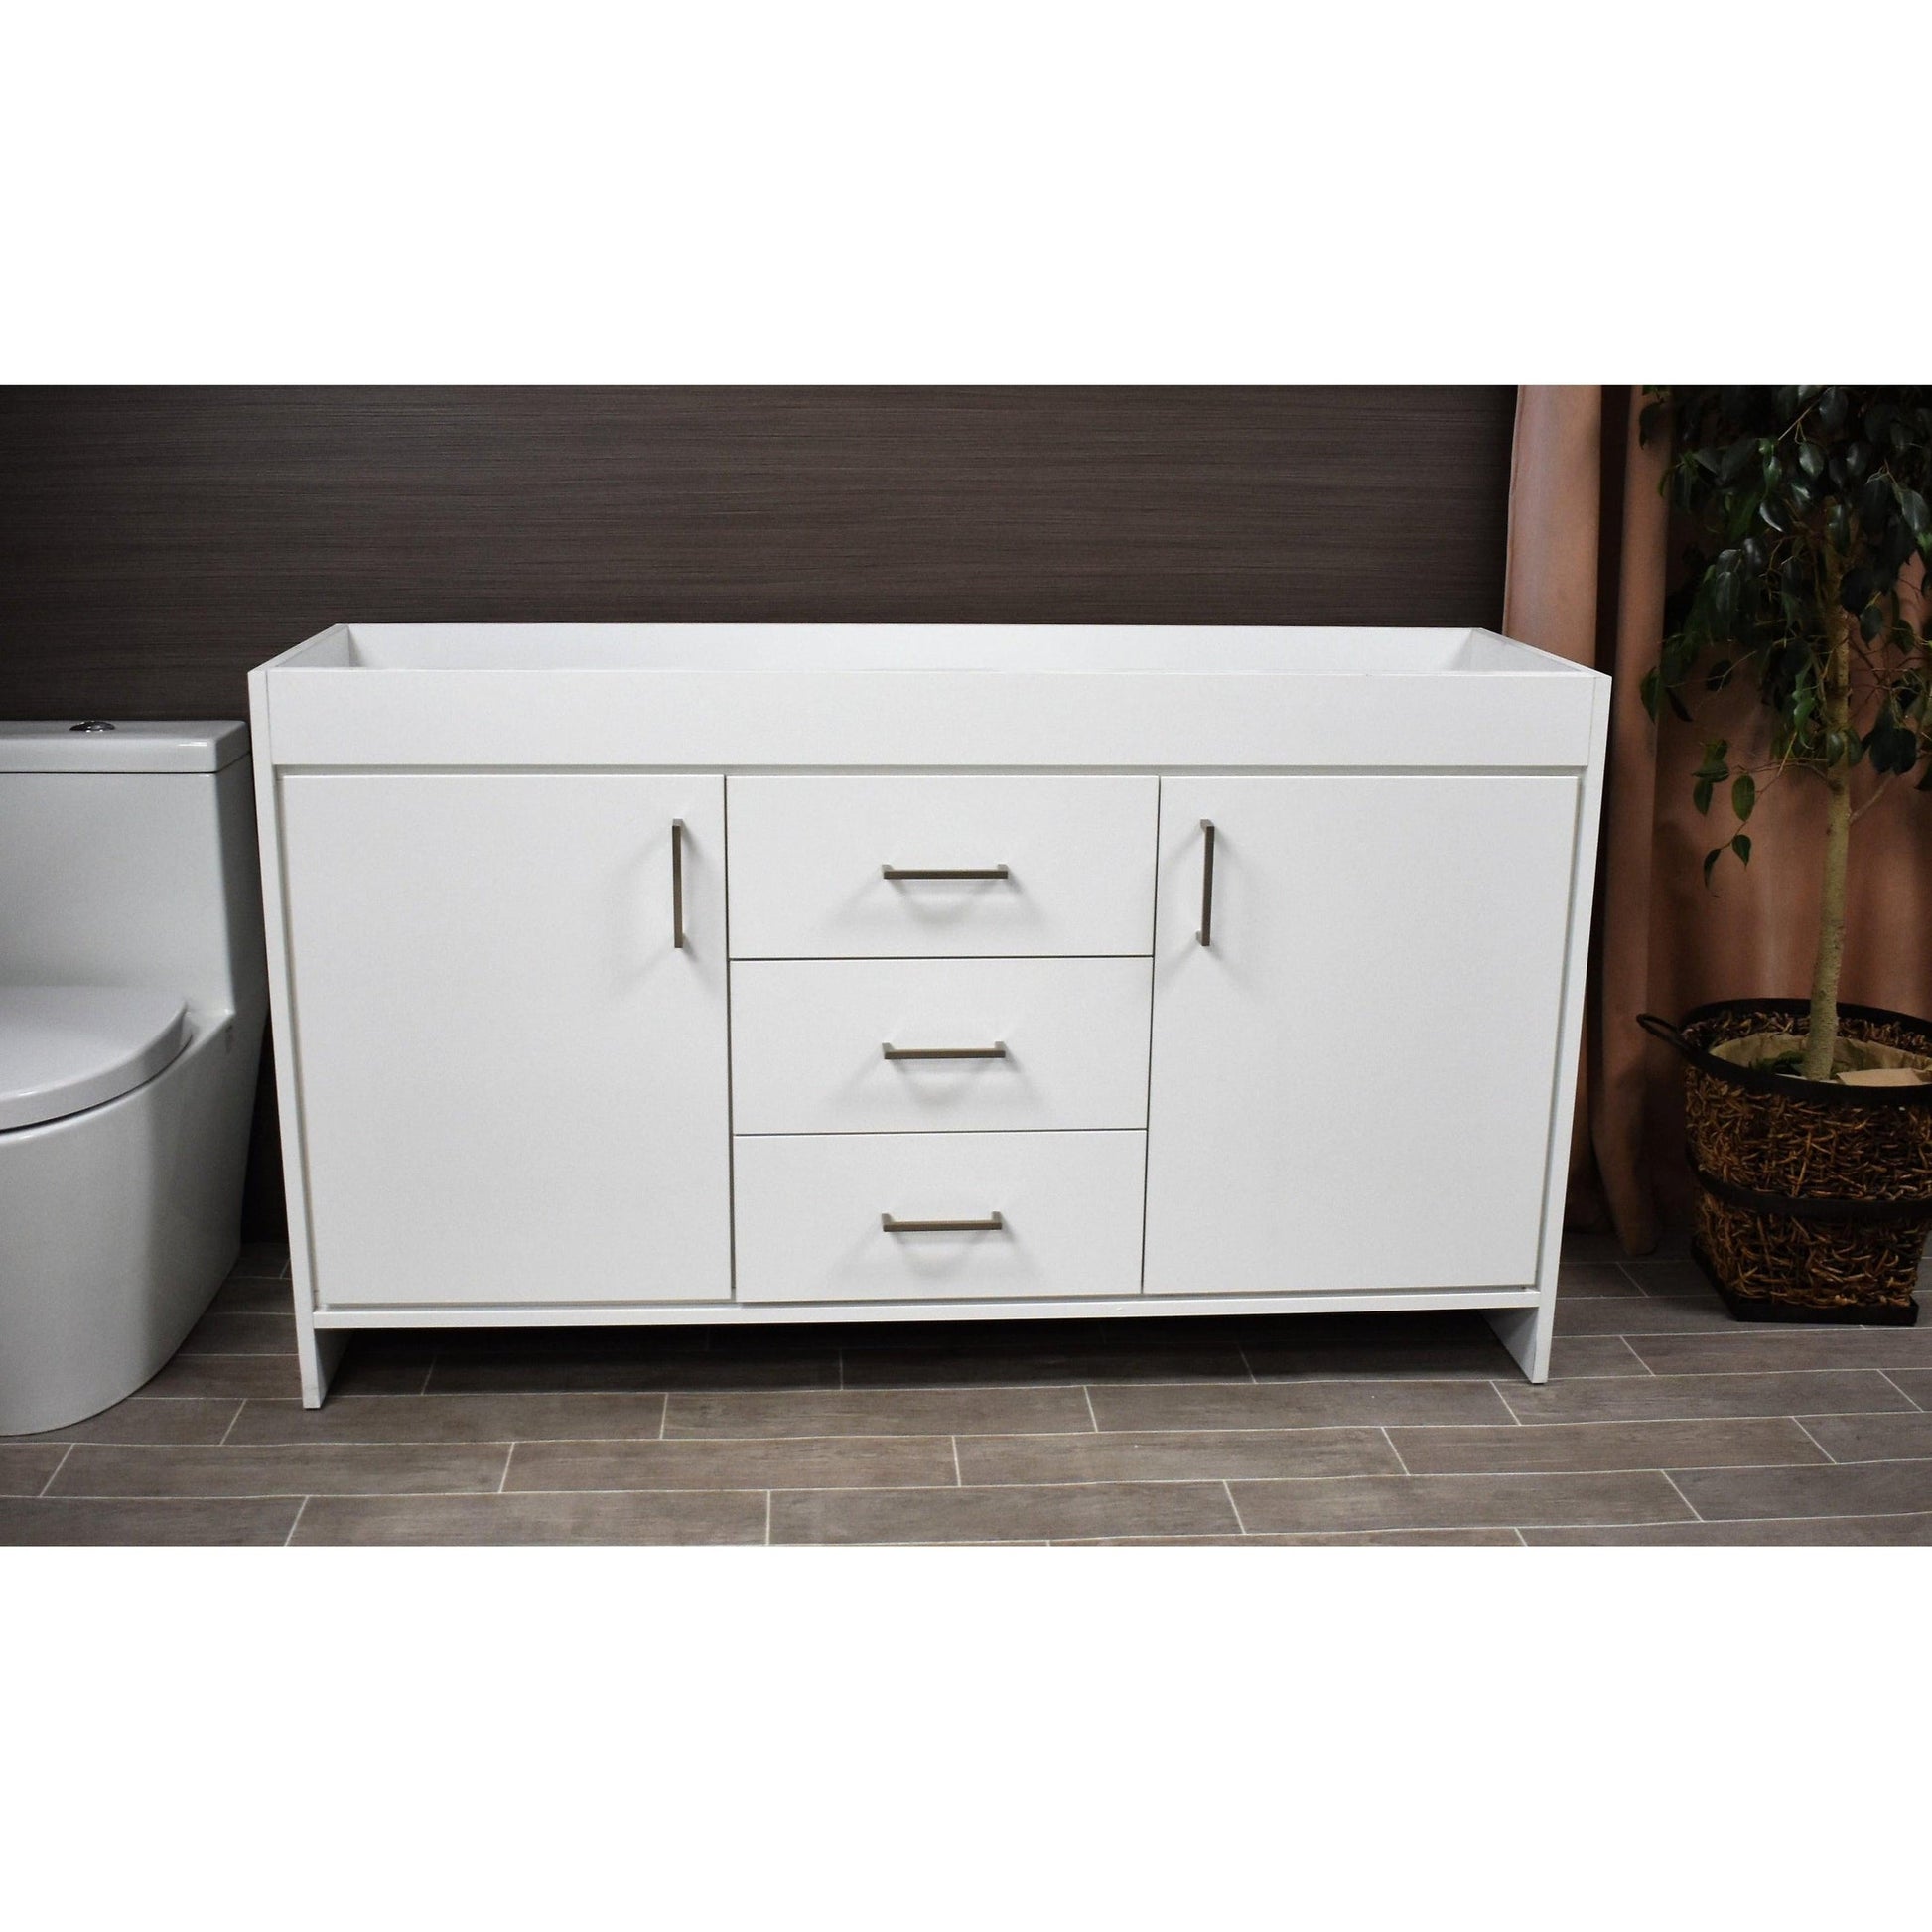 Volpa USA Rio 60" White Freestanding Modern Bathroom Vanity For Double Sinks With Brushed Nickel Handles